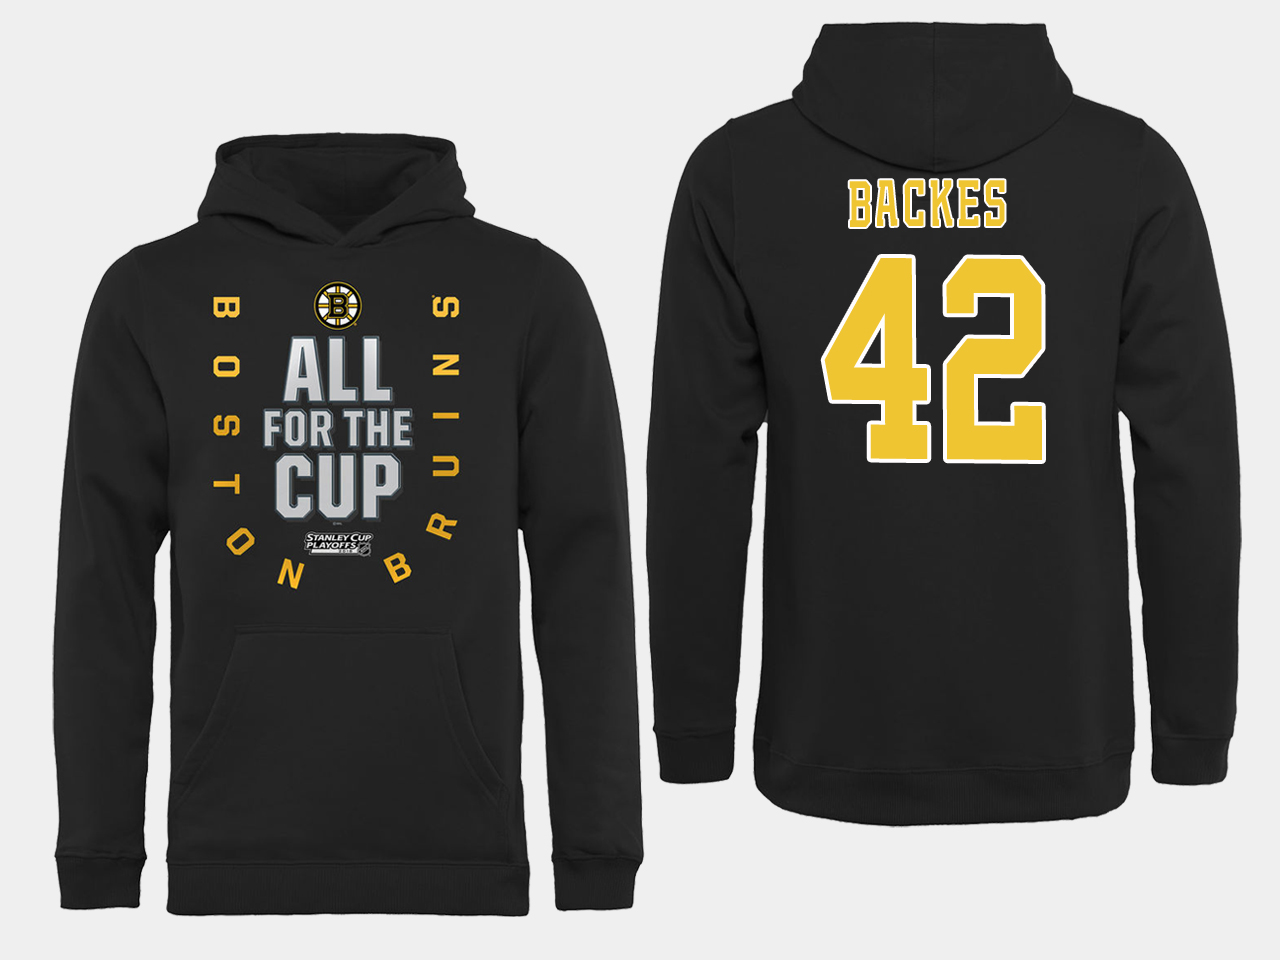 NHL Men Boston Bruins #42 Backes Black All for the Cup Hoodie->boston bruins->NHL Jersey